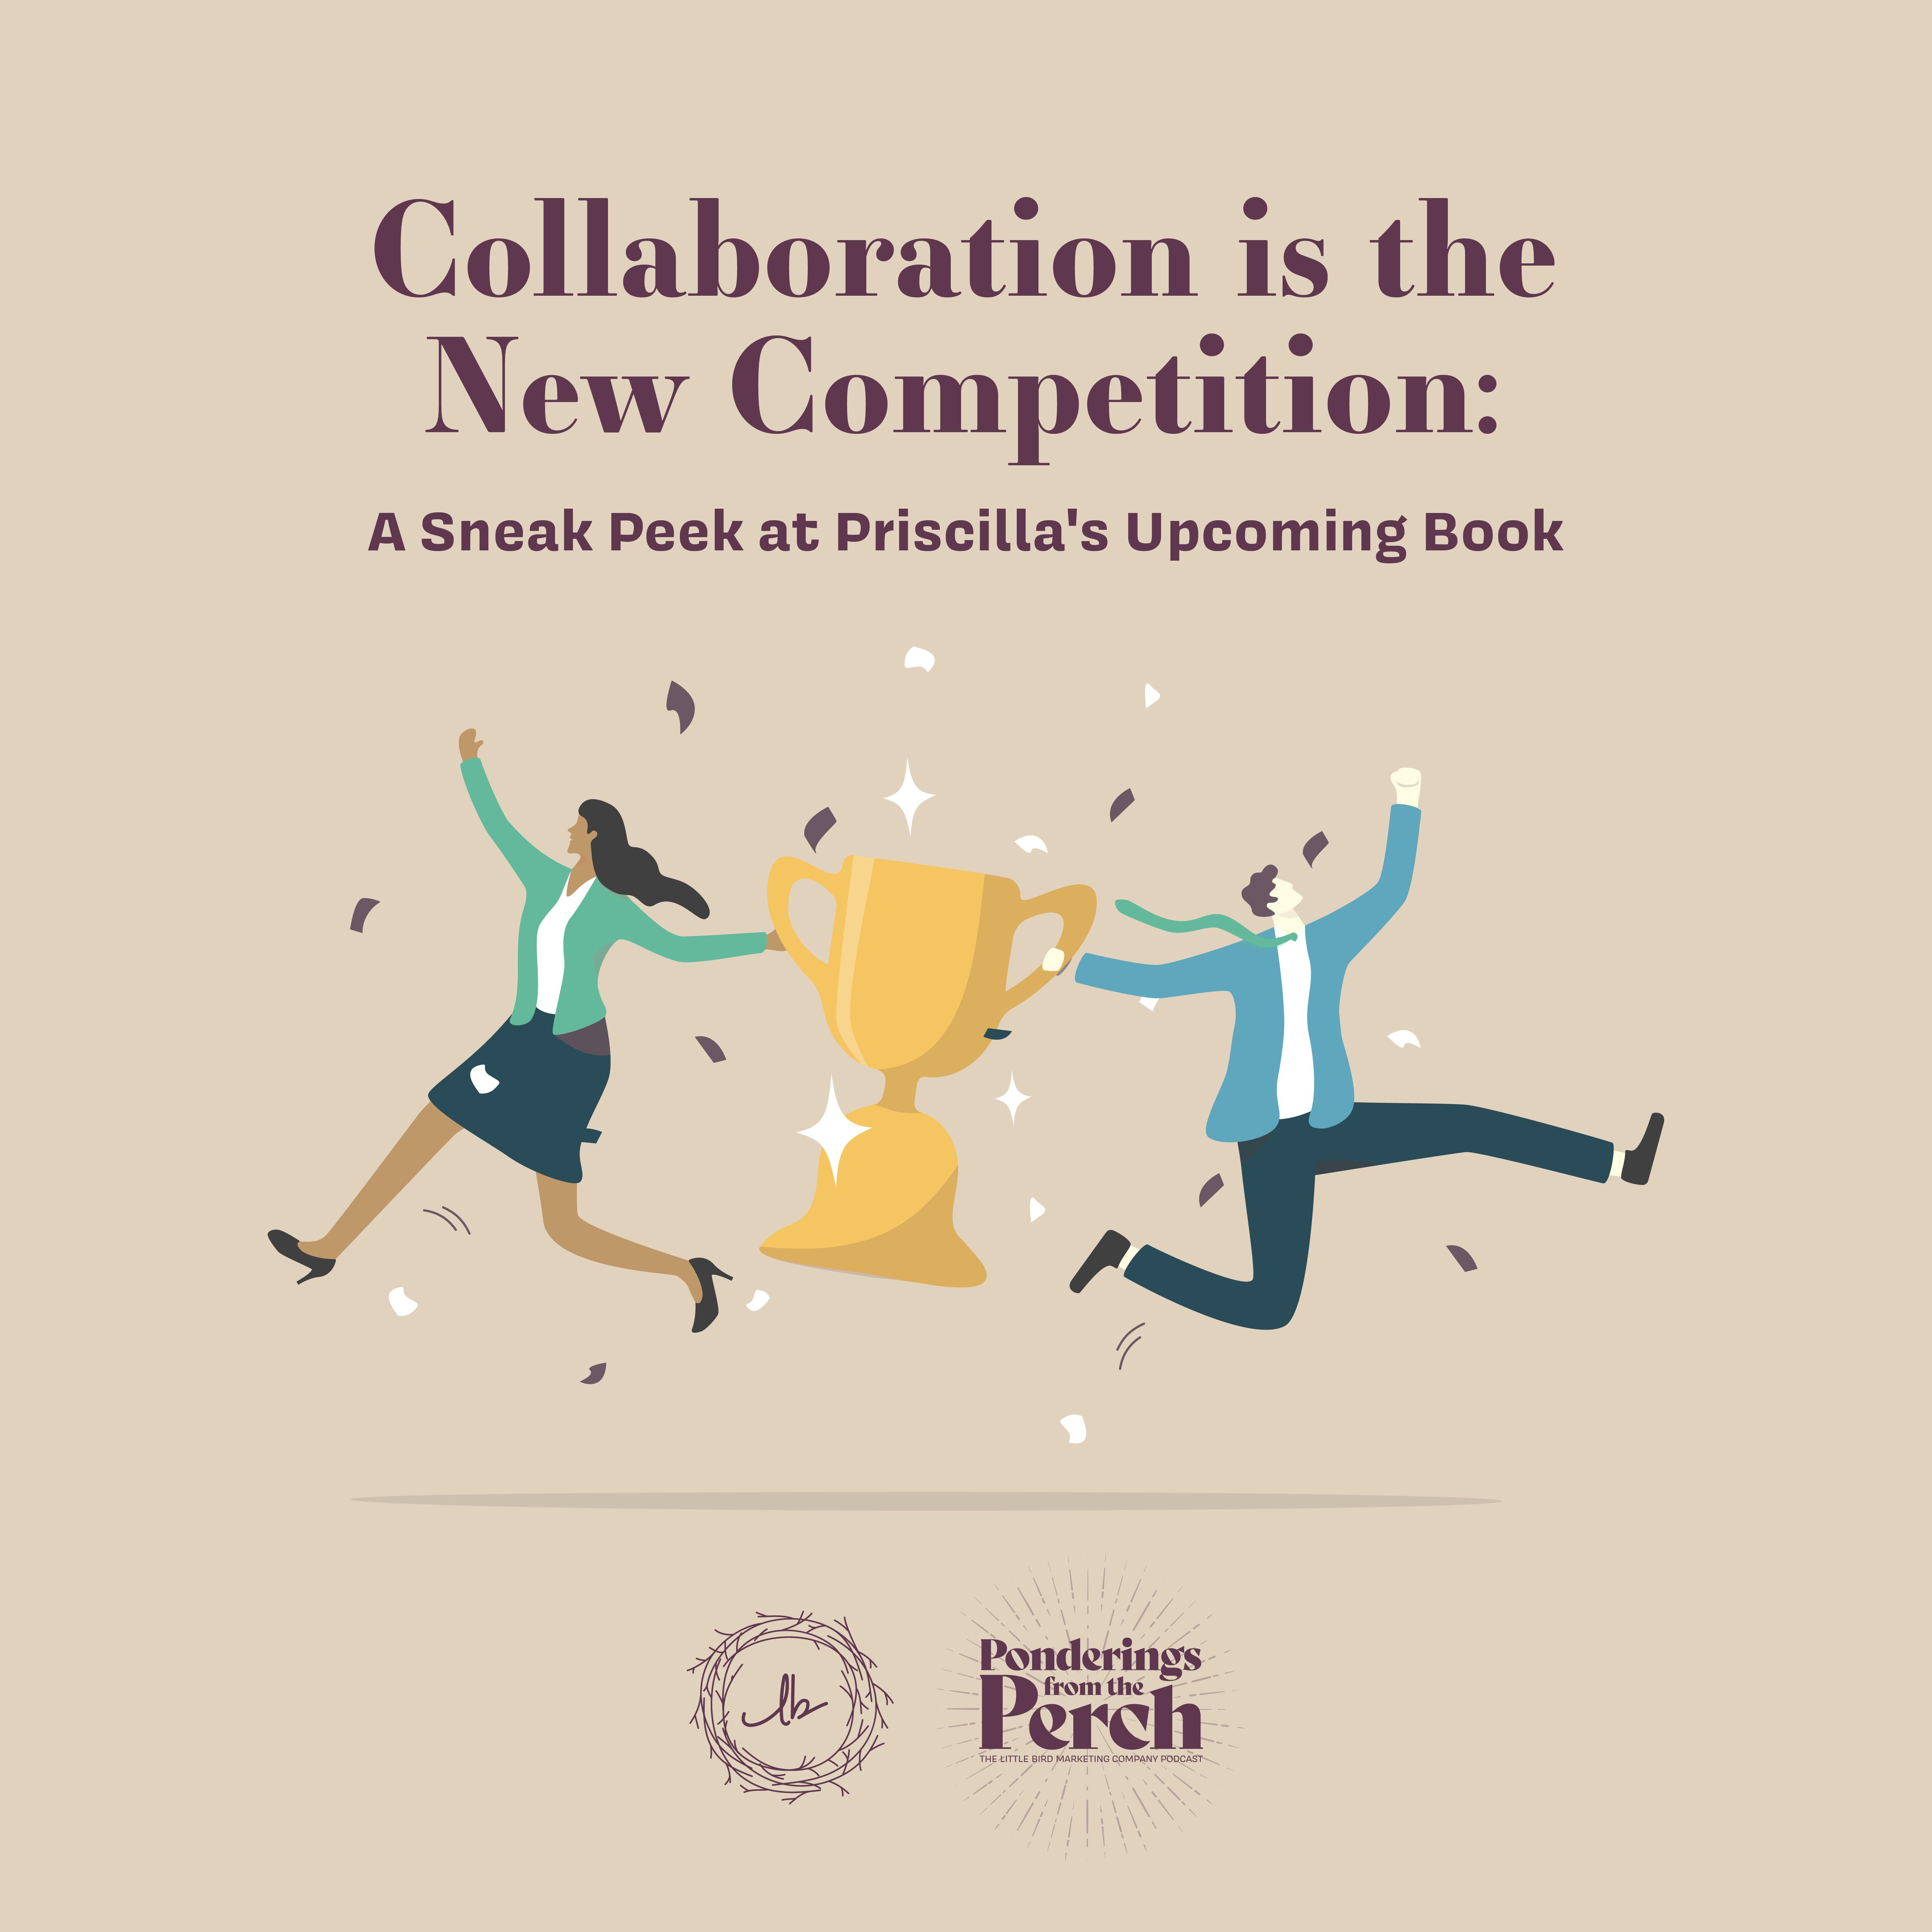 Collaboration is the New Competition: A Sneak Peek at Priscilla's Upcoming Book